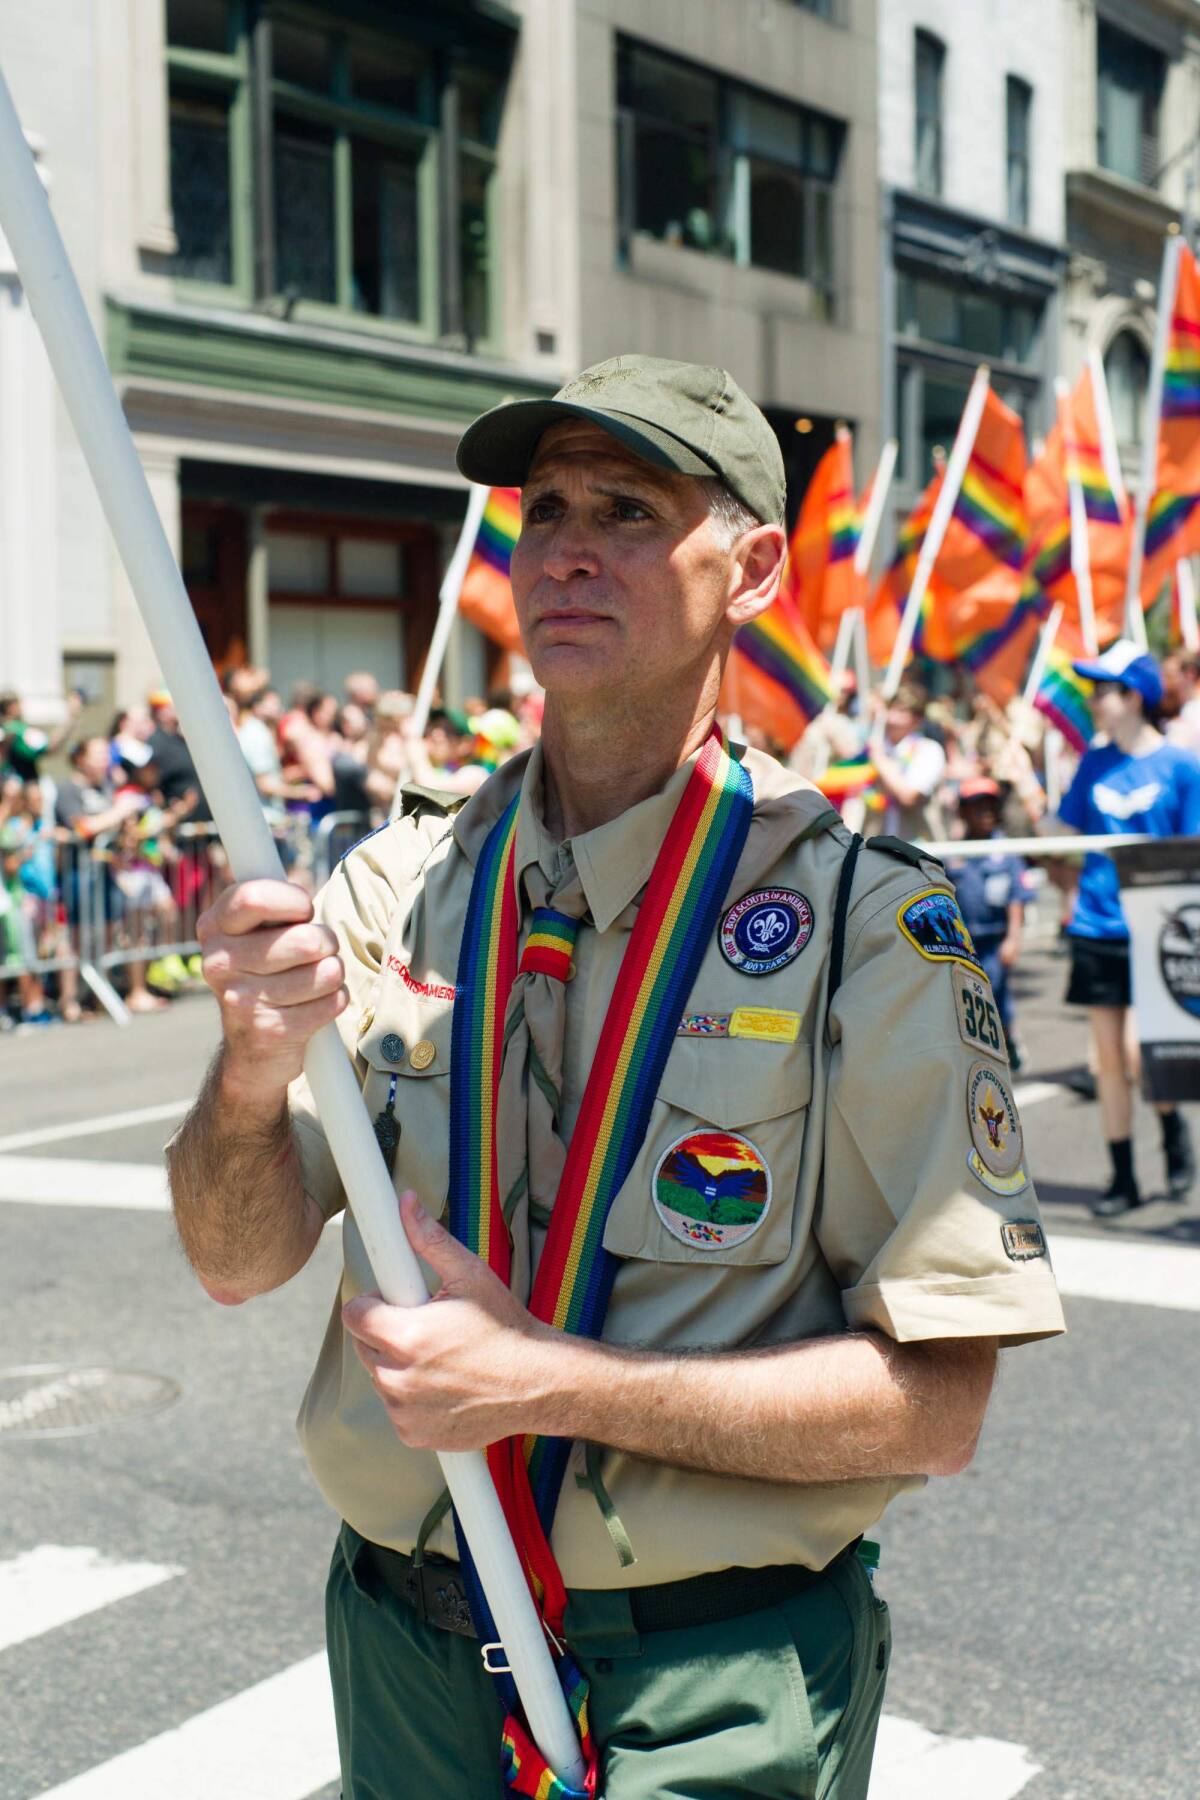 First Black, openly gay Boy Scouts executive, CEO from Portland